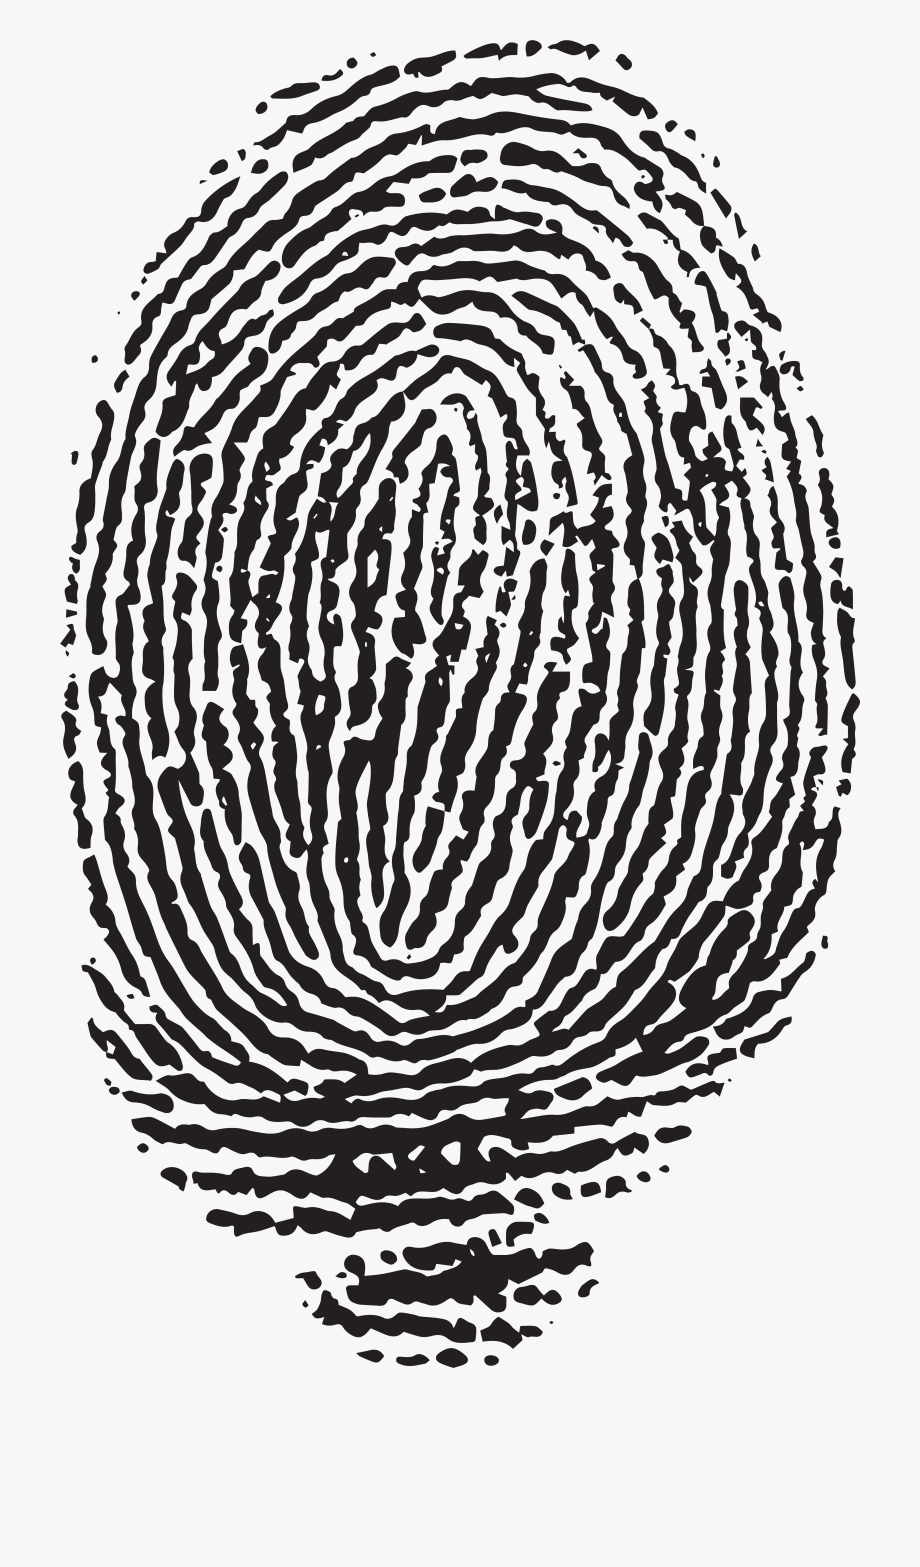 Fingerprint clipart high resolution. Png download image with